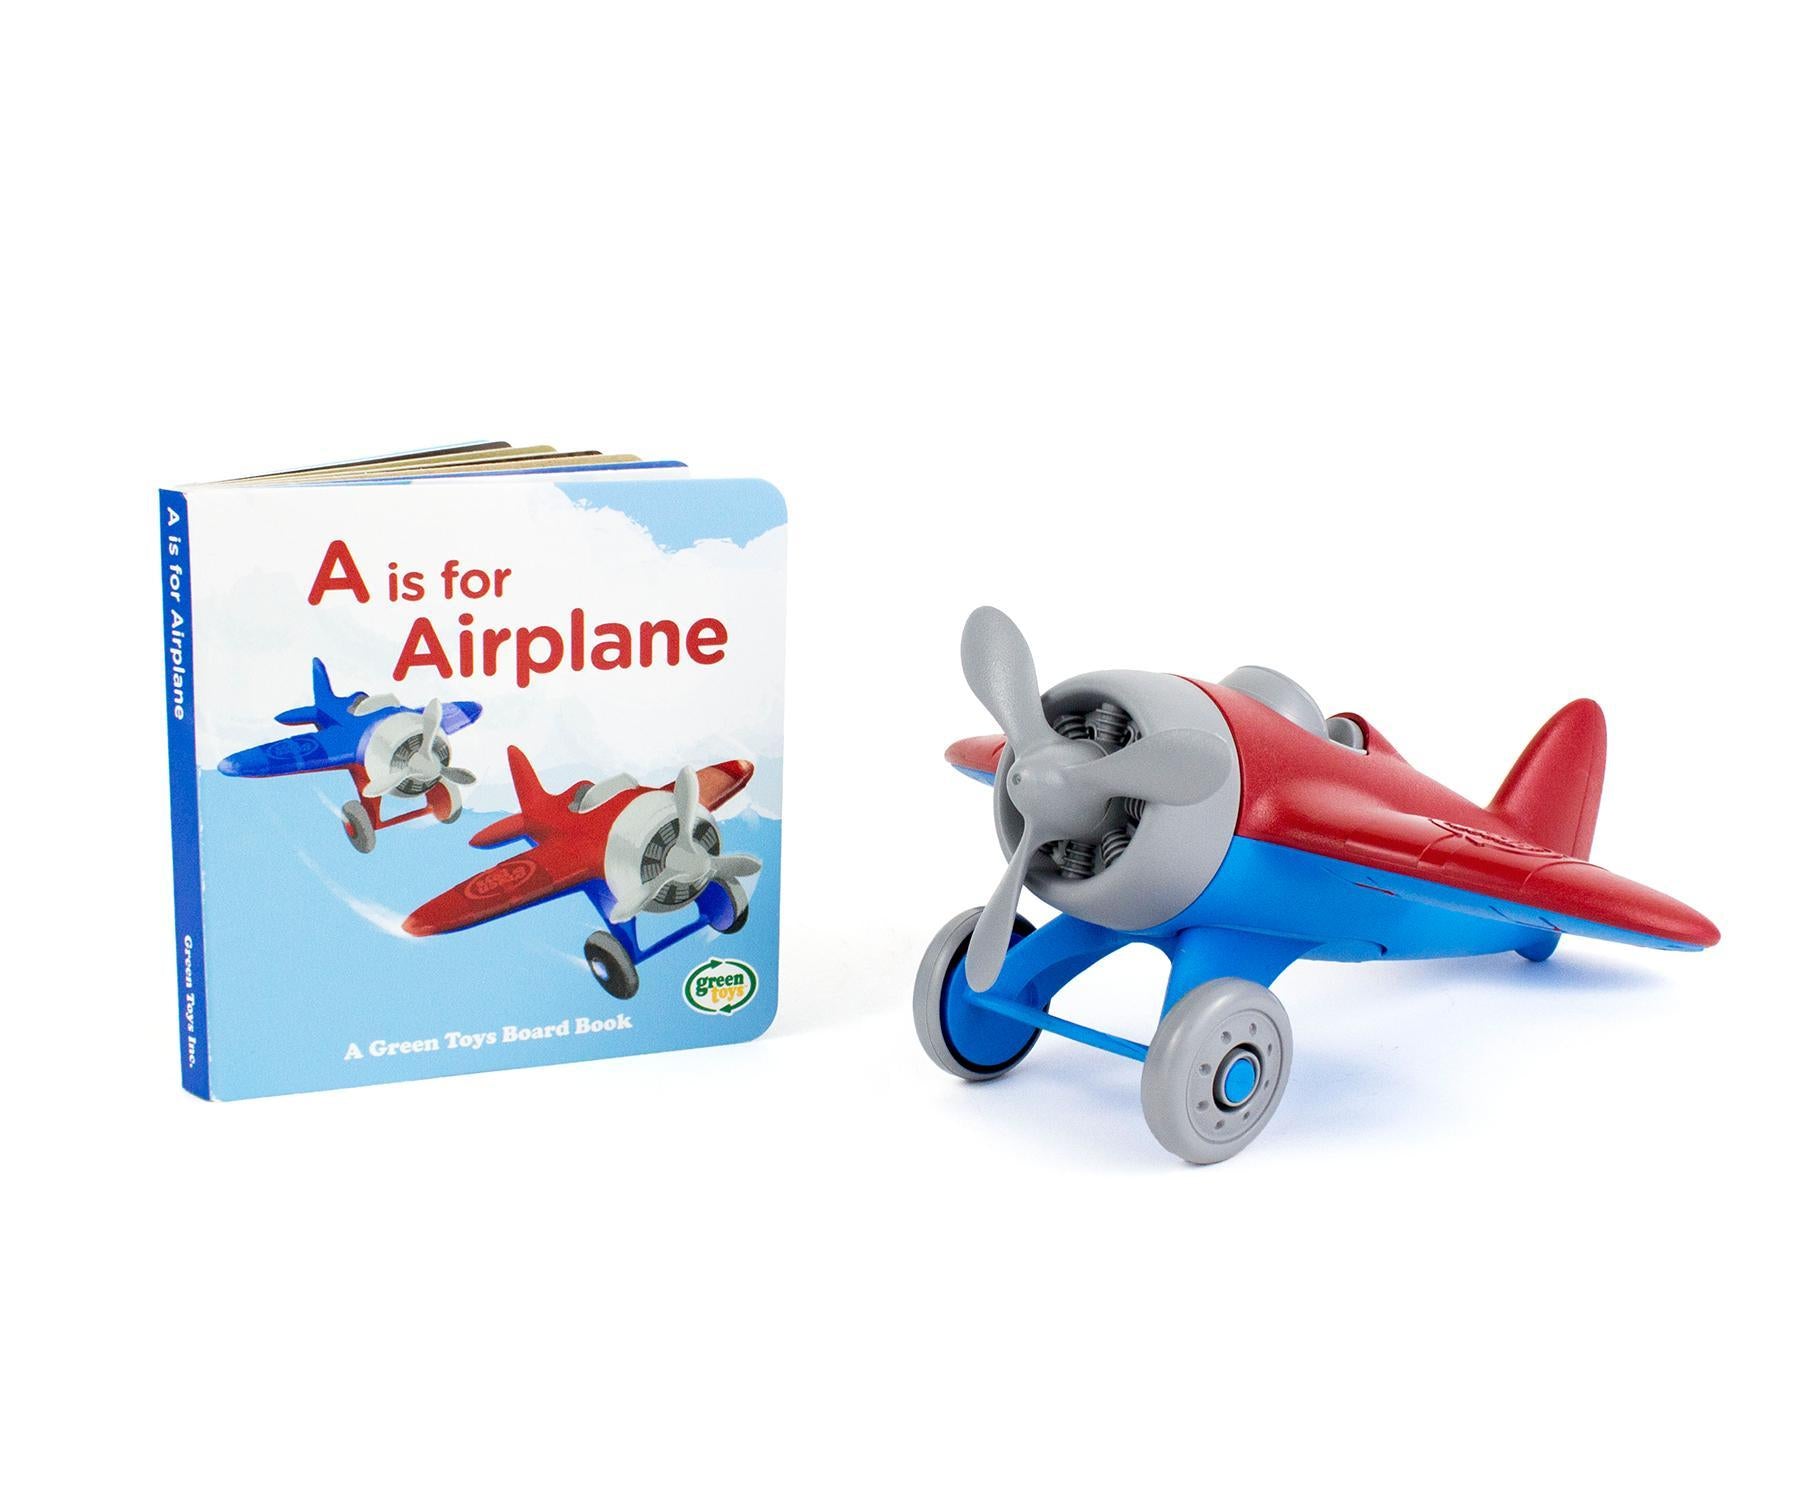 Green Toys Airplane and Board Book Set - Red or Blue Airplane    